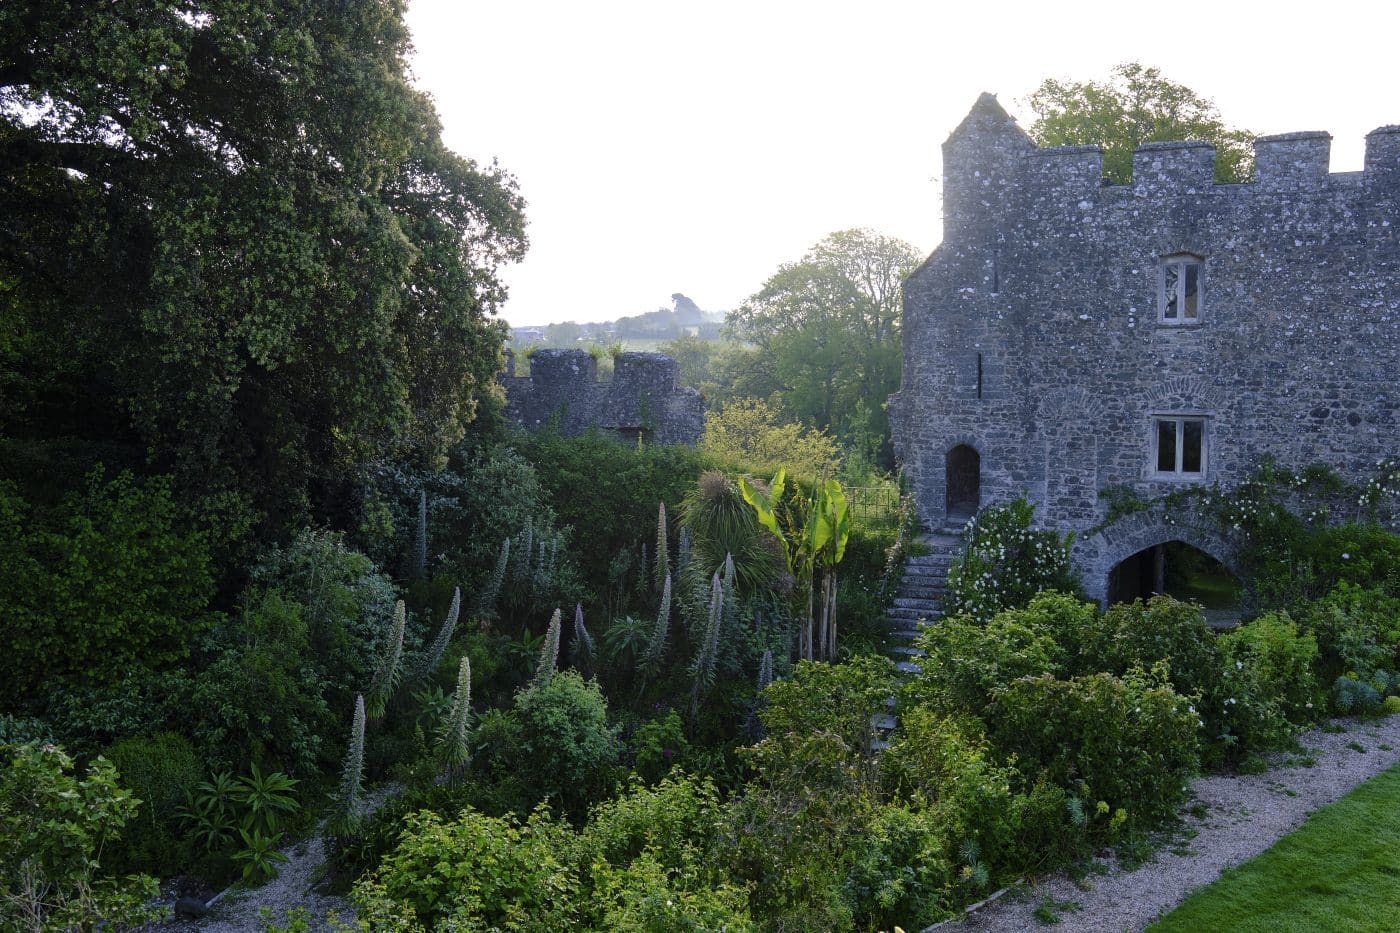 A view of the stone exterior and gardens of Trematon Castle